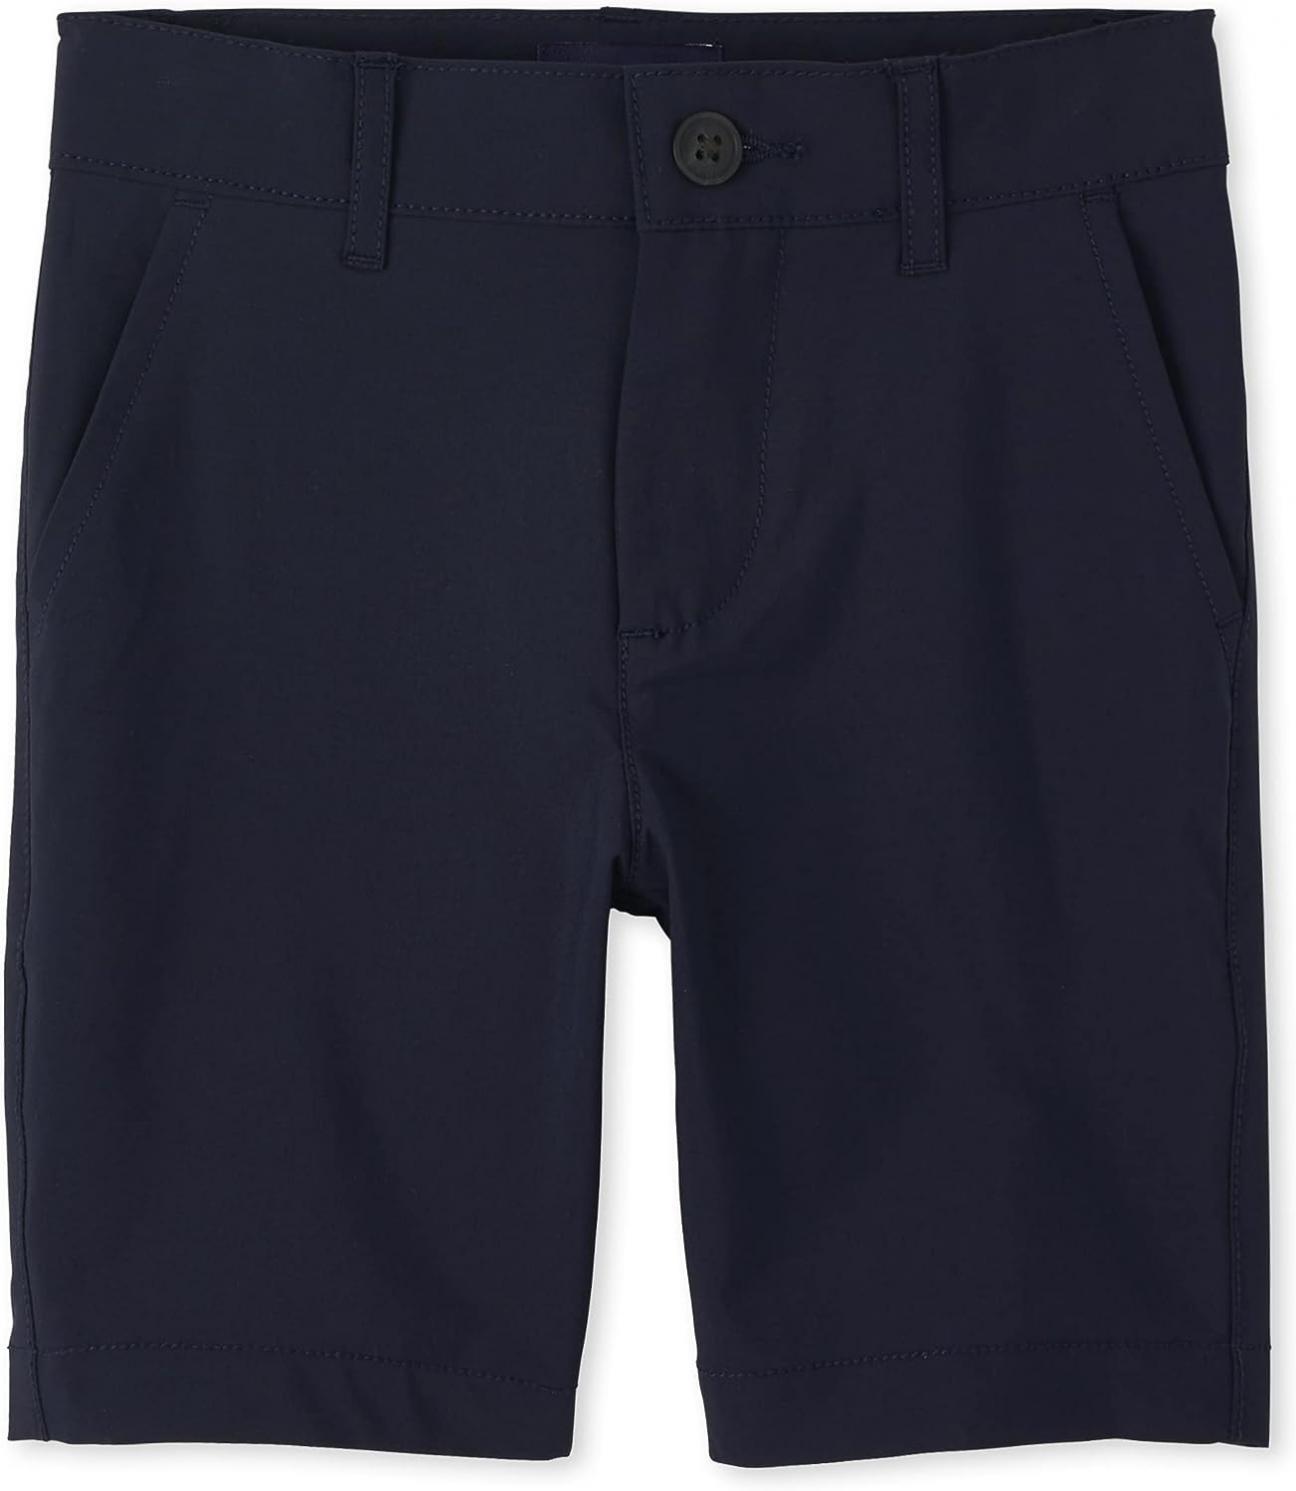 The Children's Place Boys' Uniform Quick Dry Chino Shorts